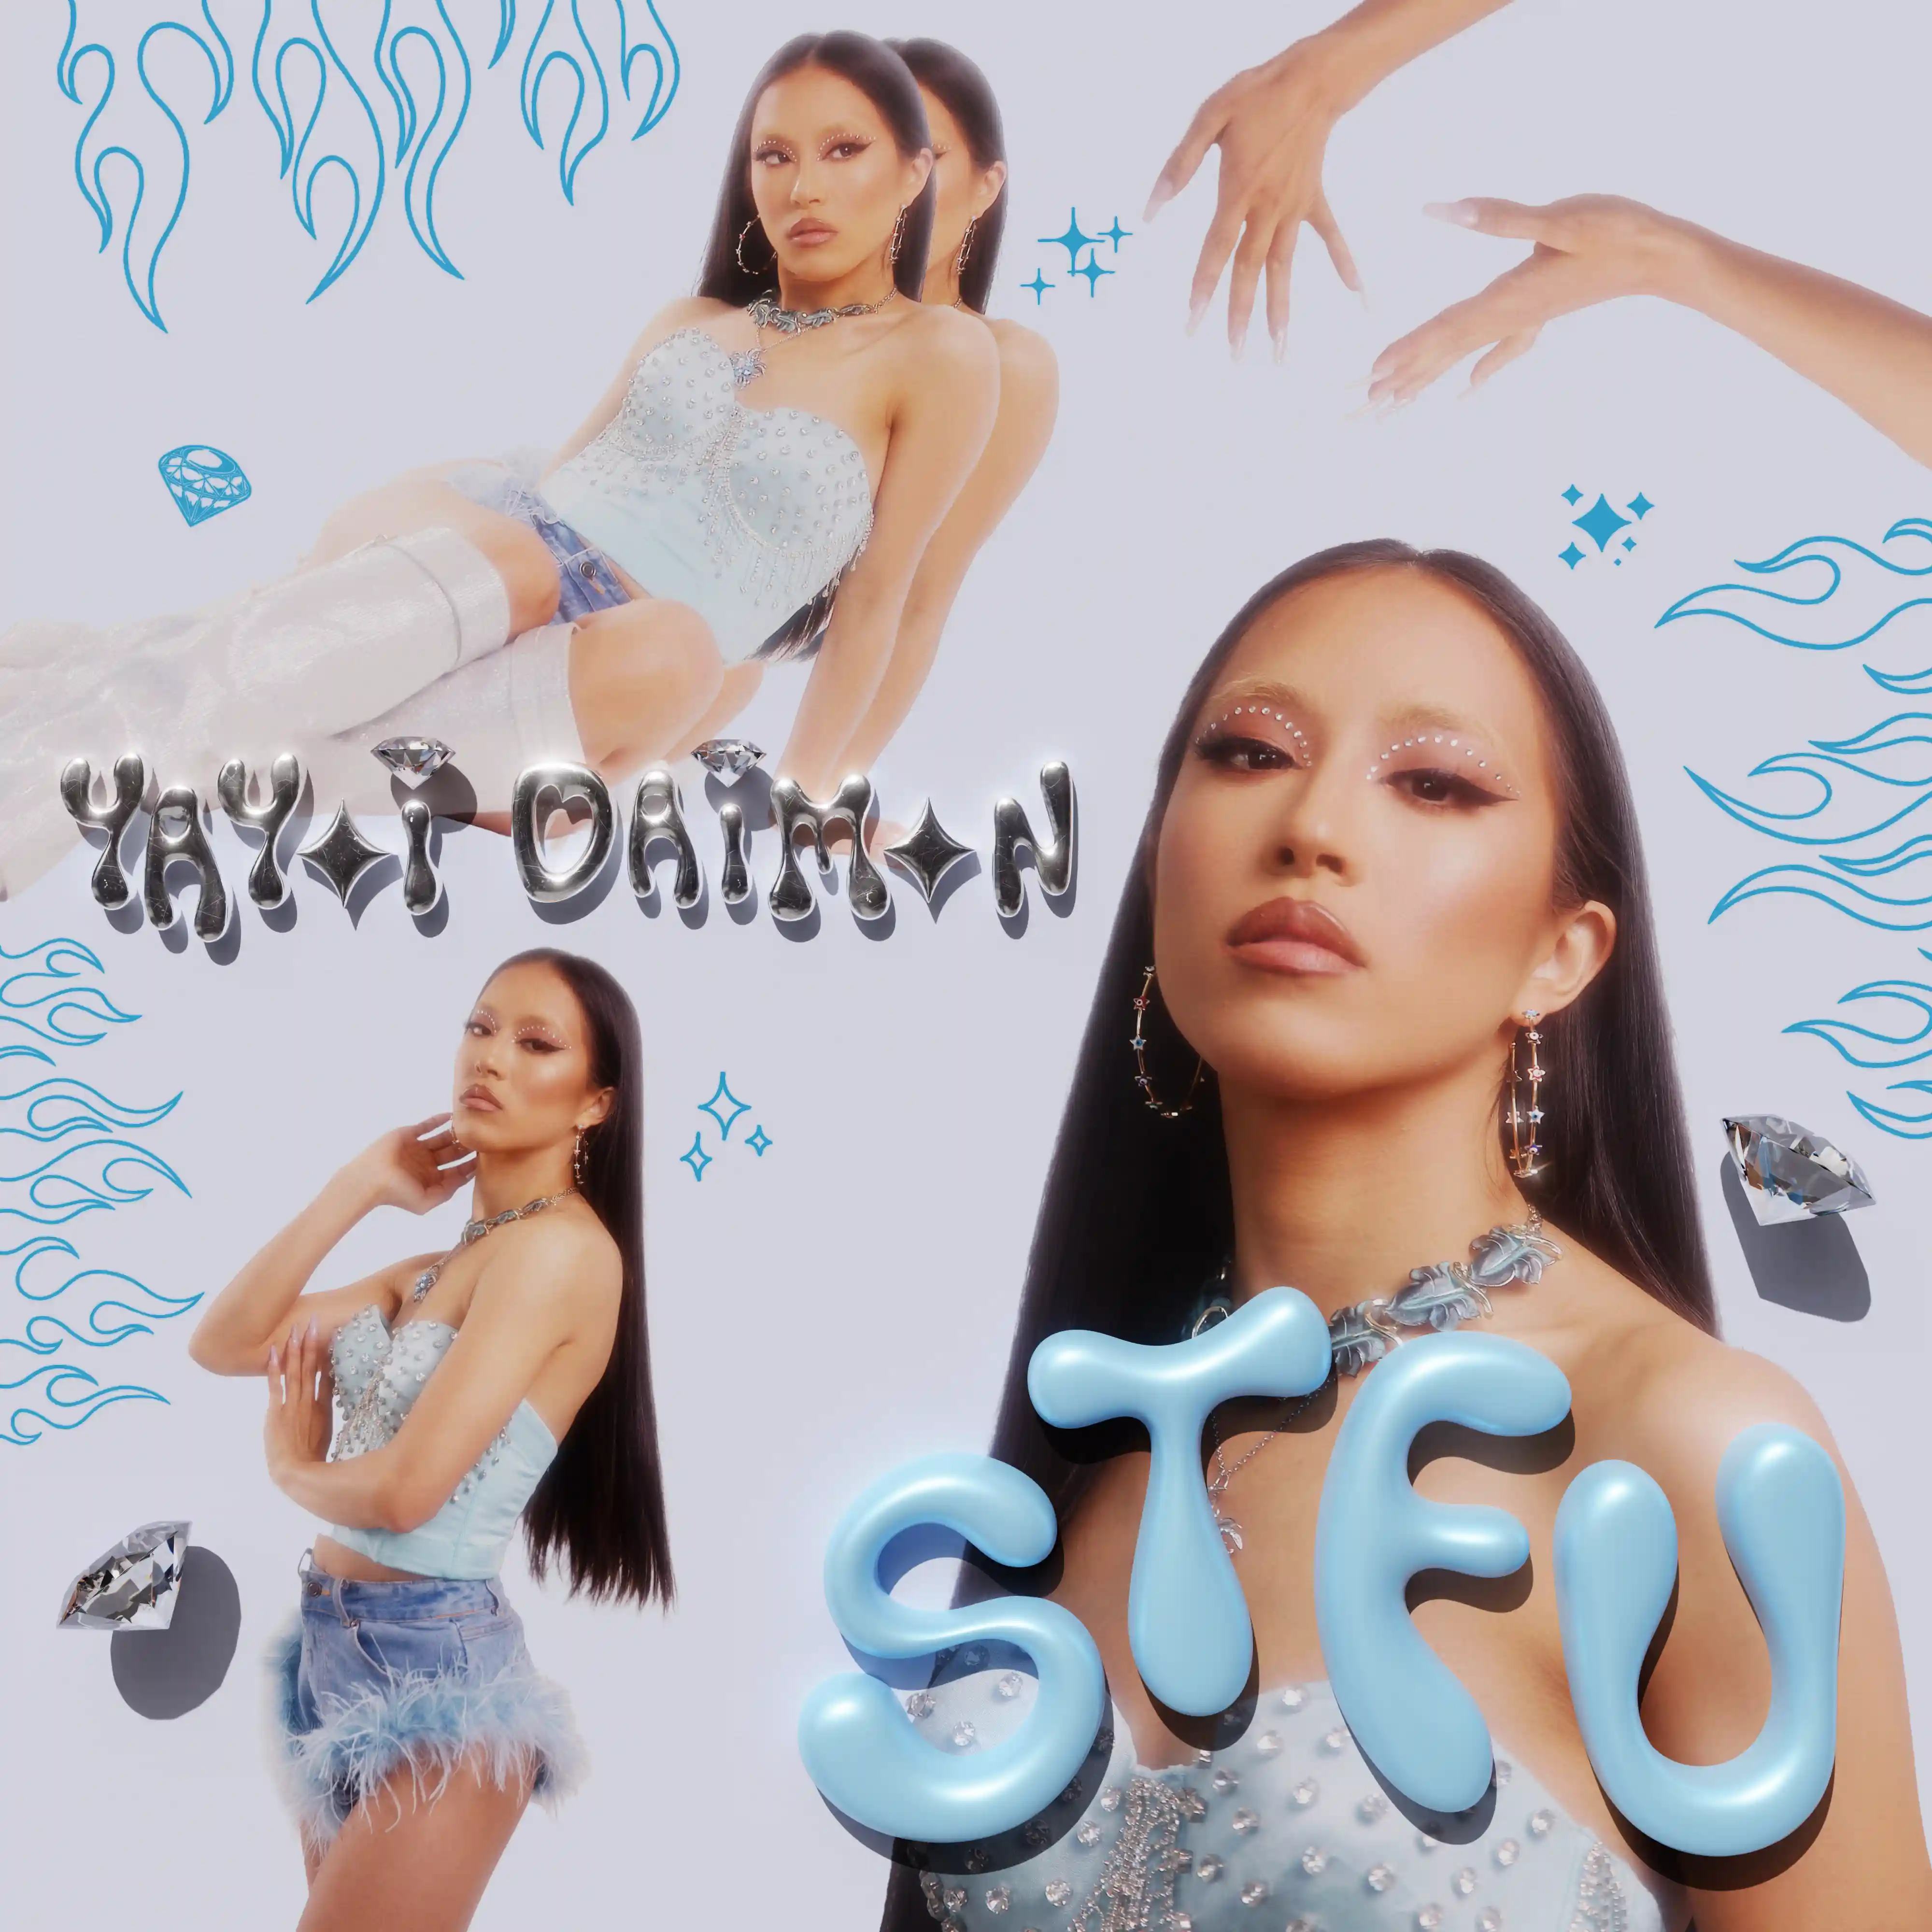 ‘STFU’: Yayoi Daimon has 4 letters for anyone who offers her ...